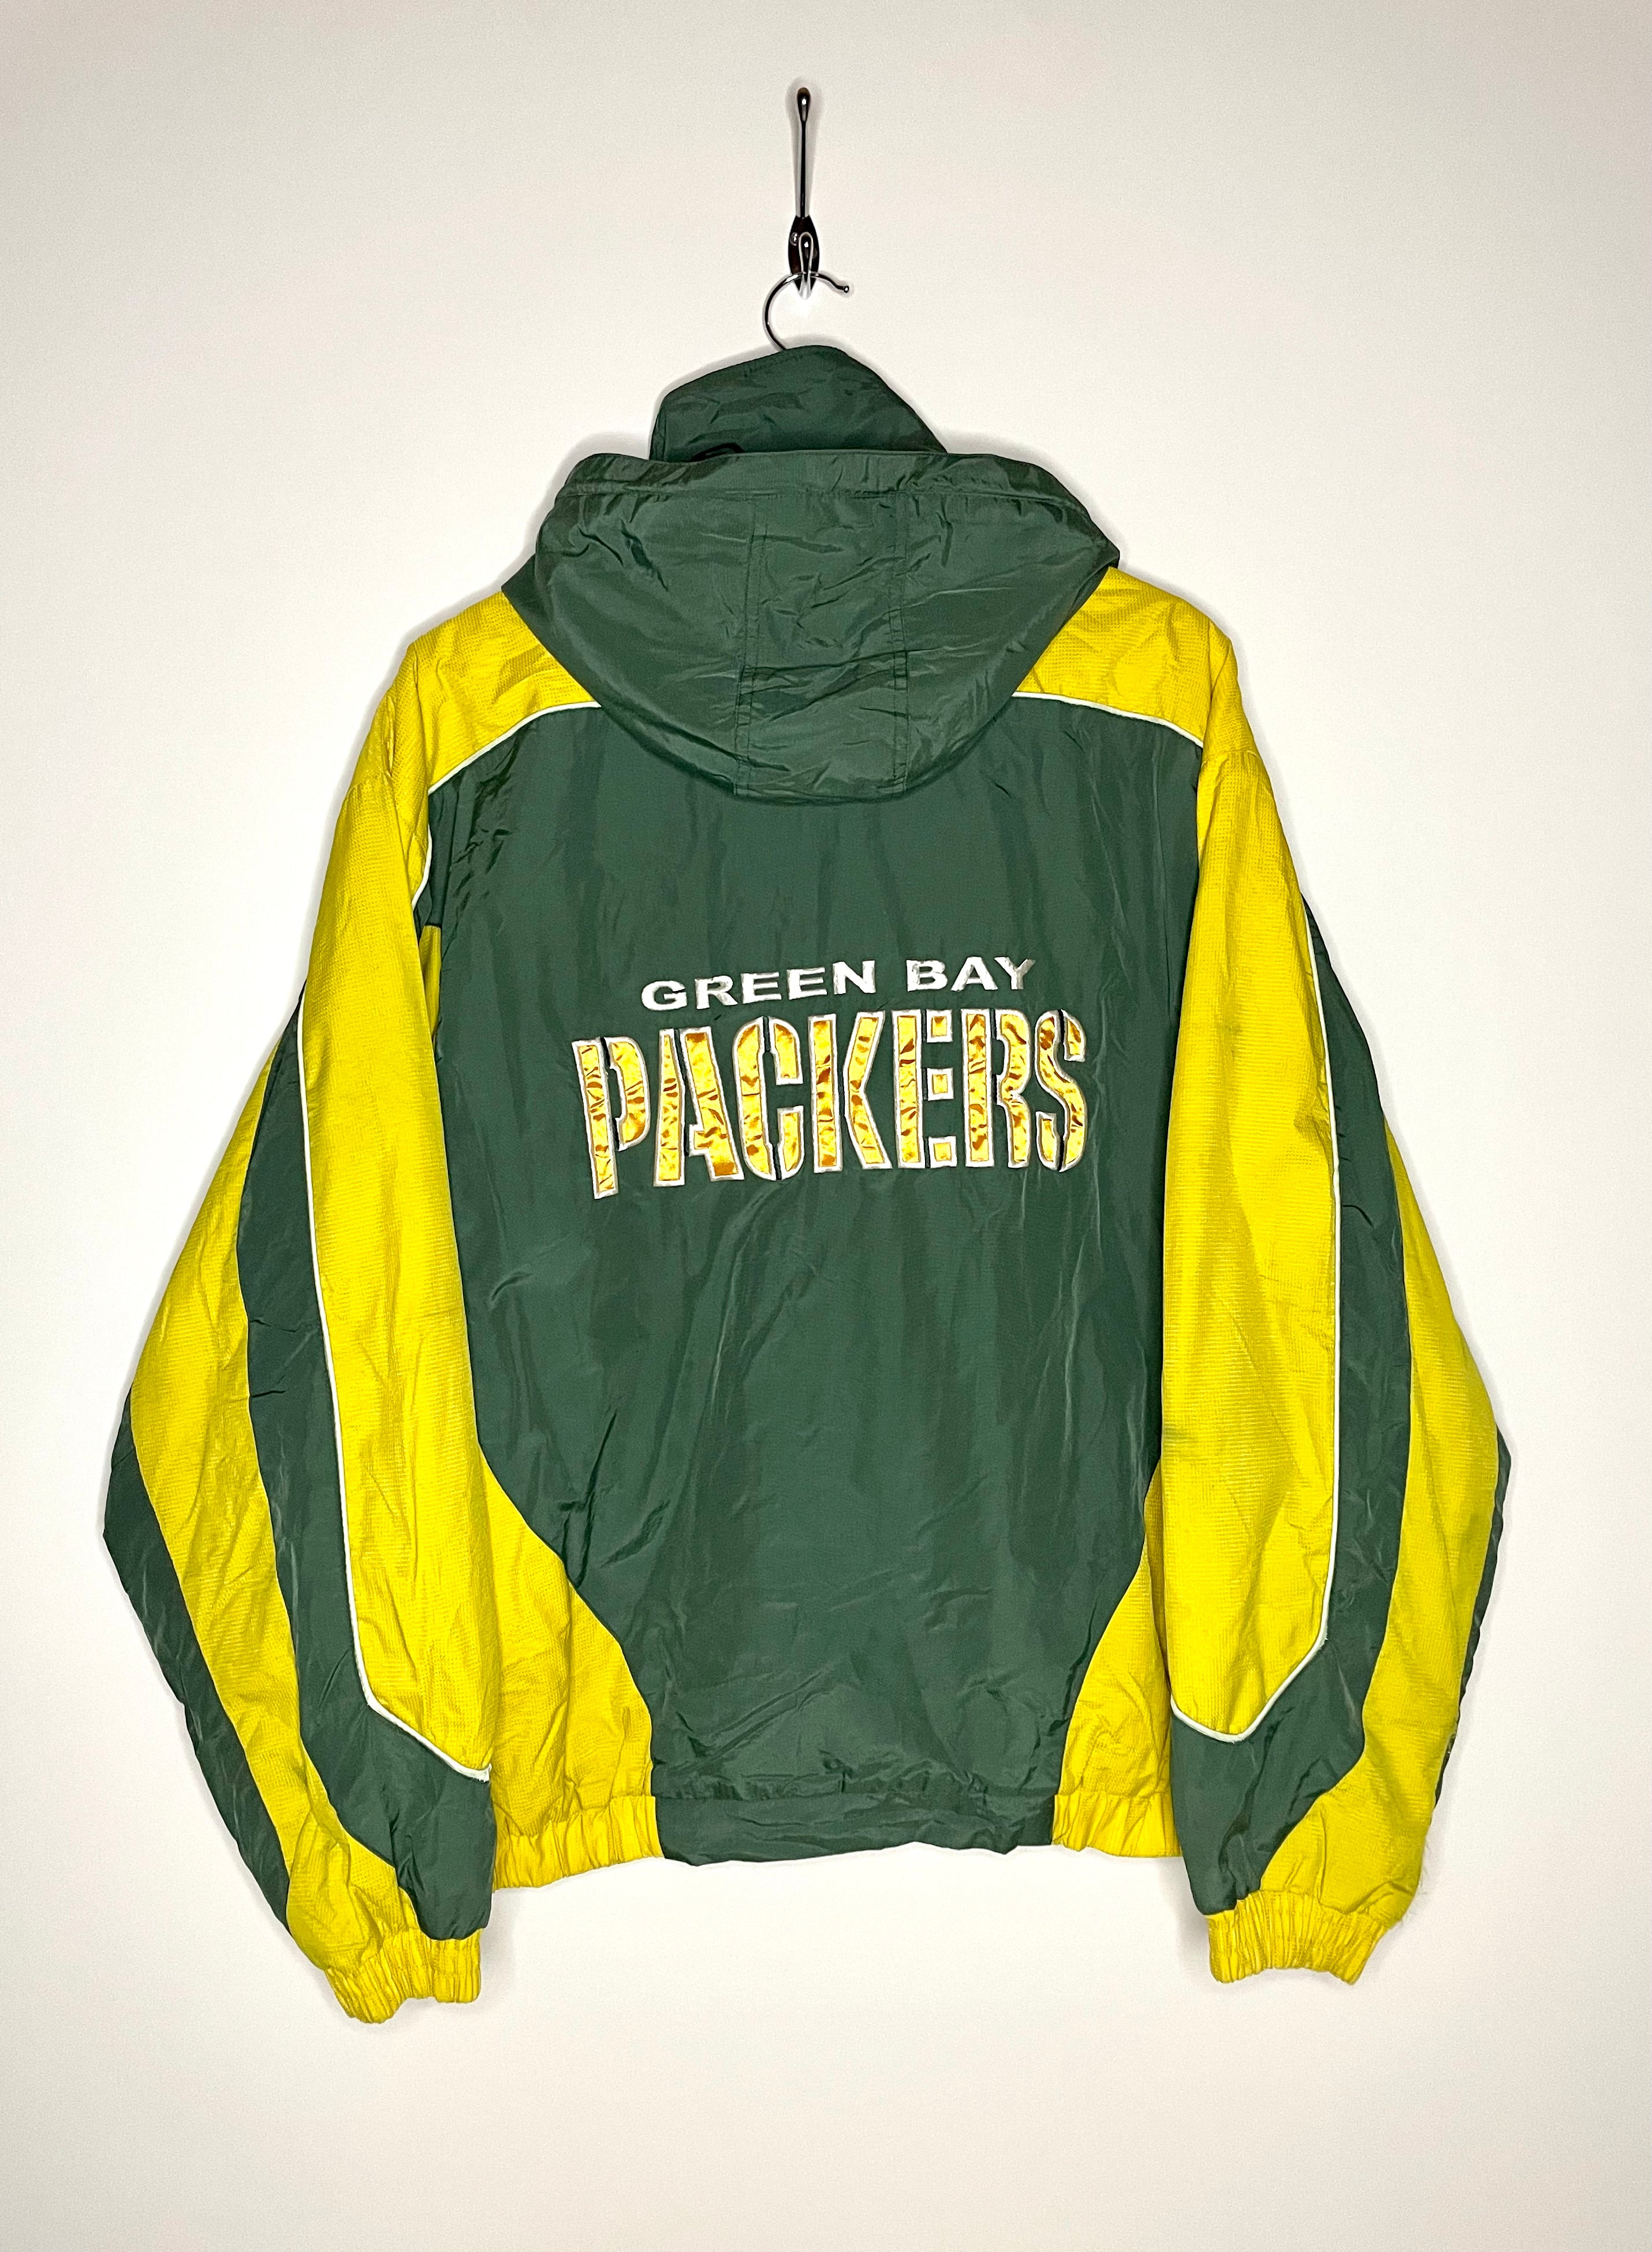 NFL Vintage Green Bay Packers Jacket Green/Yellow Size XL